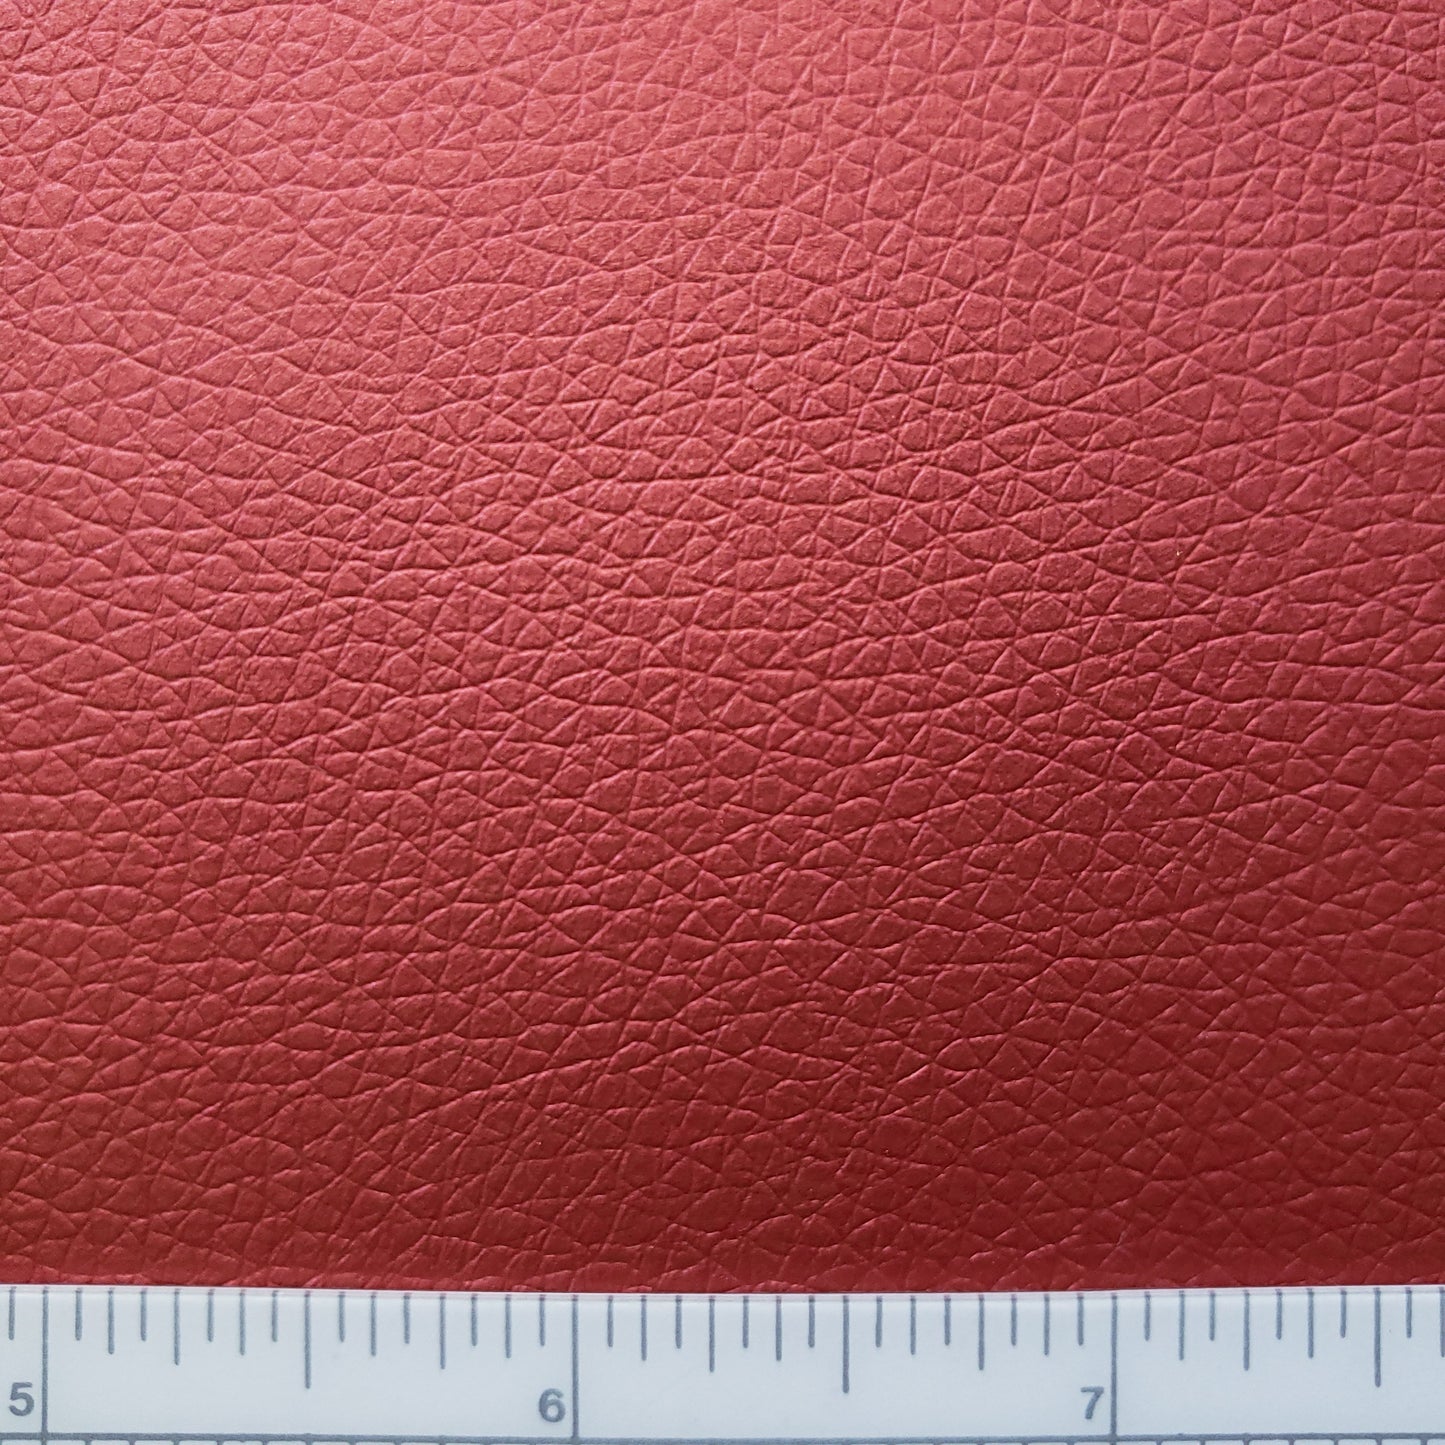 Brick Frost Faux Leather